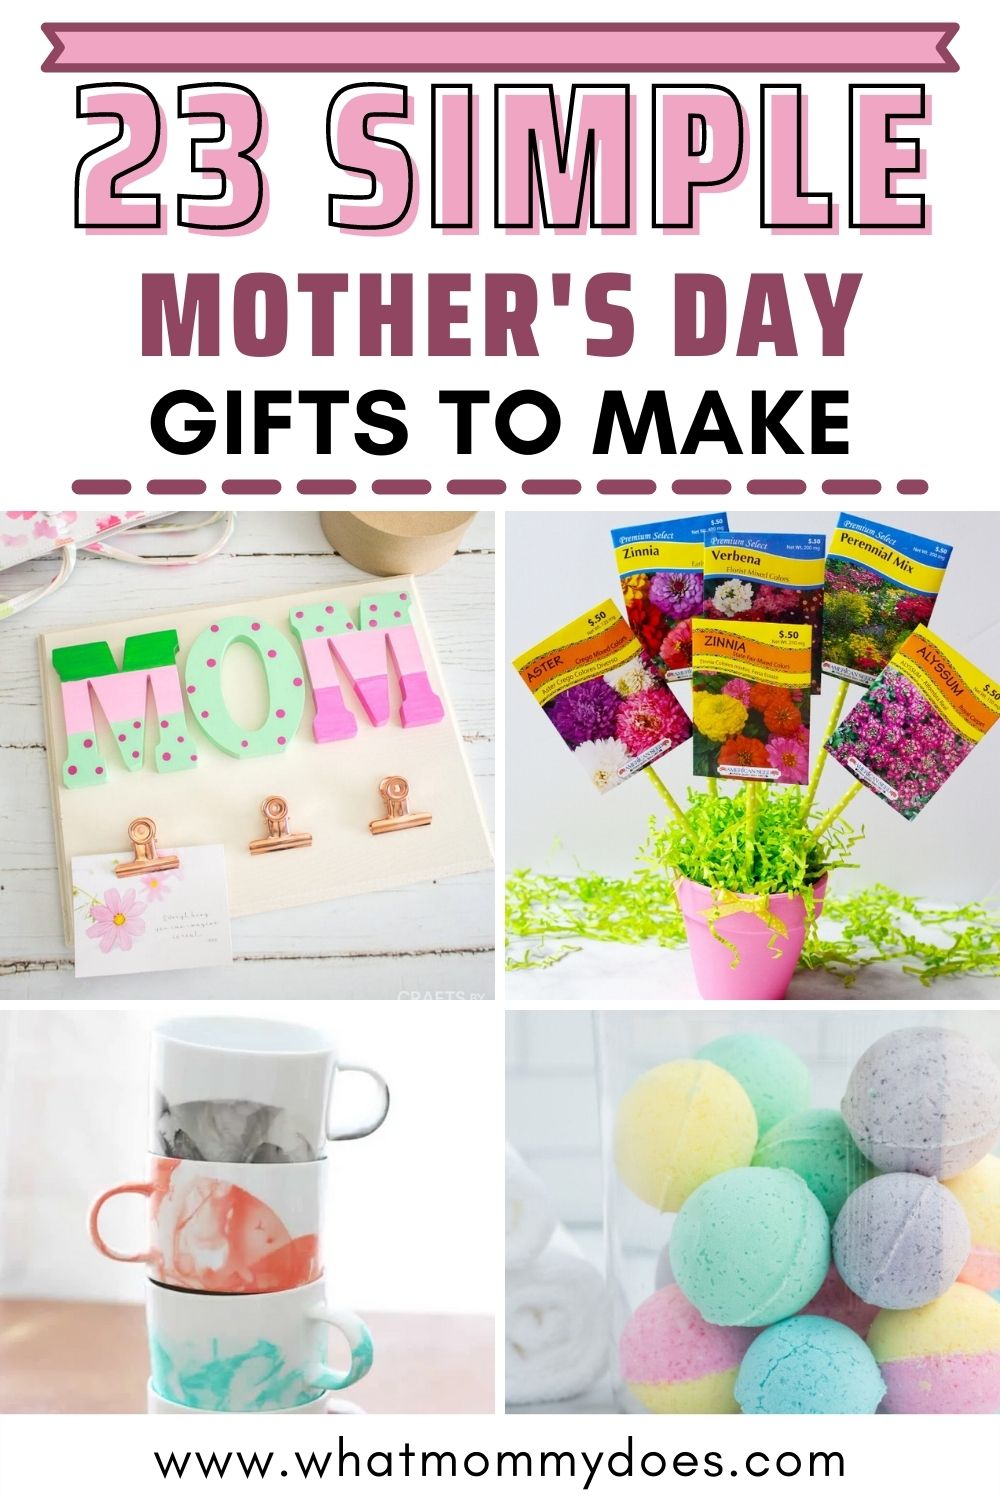 DIY Mother's Day Gifts to Pamper Mom  Relaxing Gift Ideas Using Essential  Oils